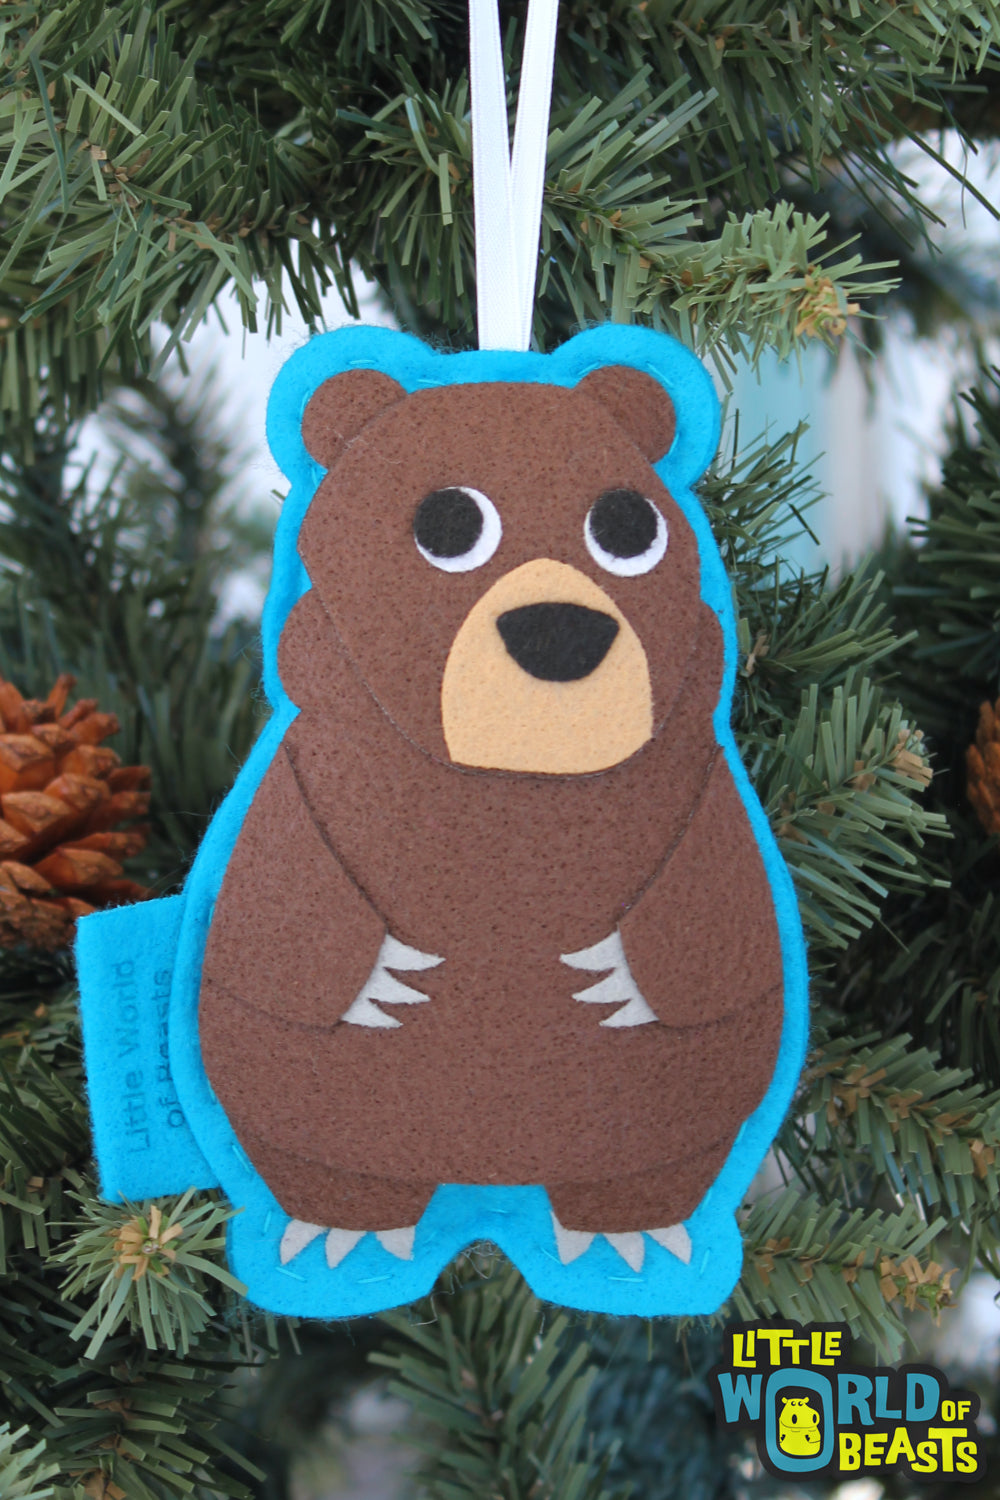 Personalized Jasper the Grizzly Bear Ornament